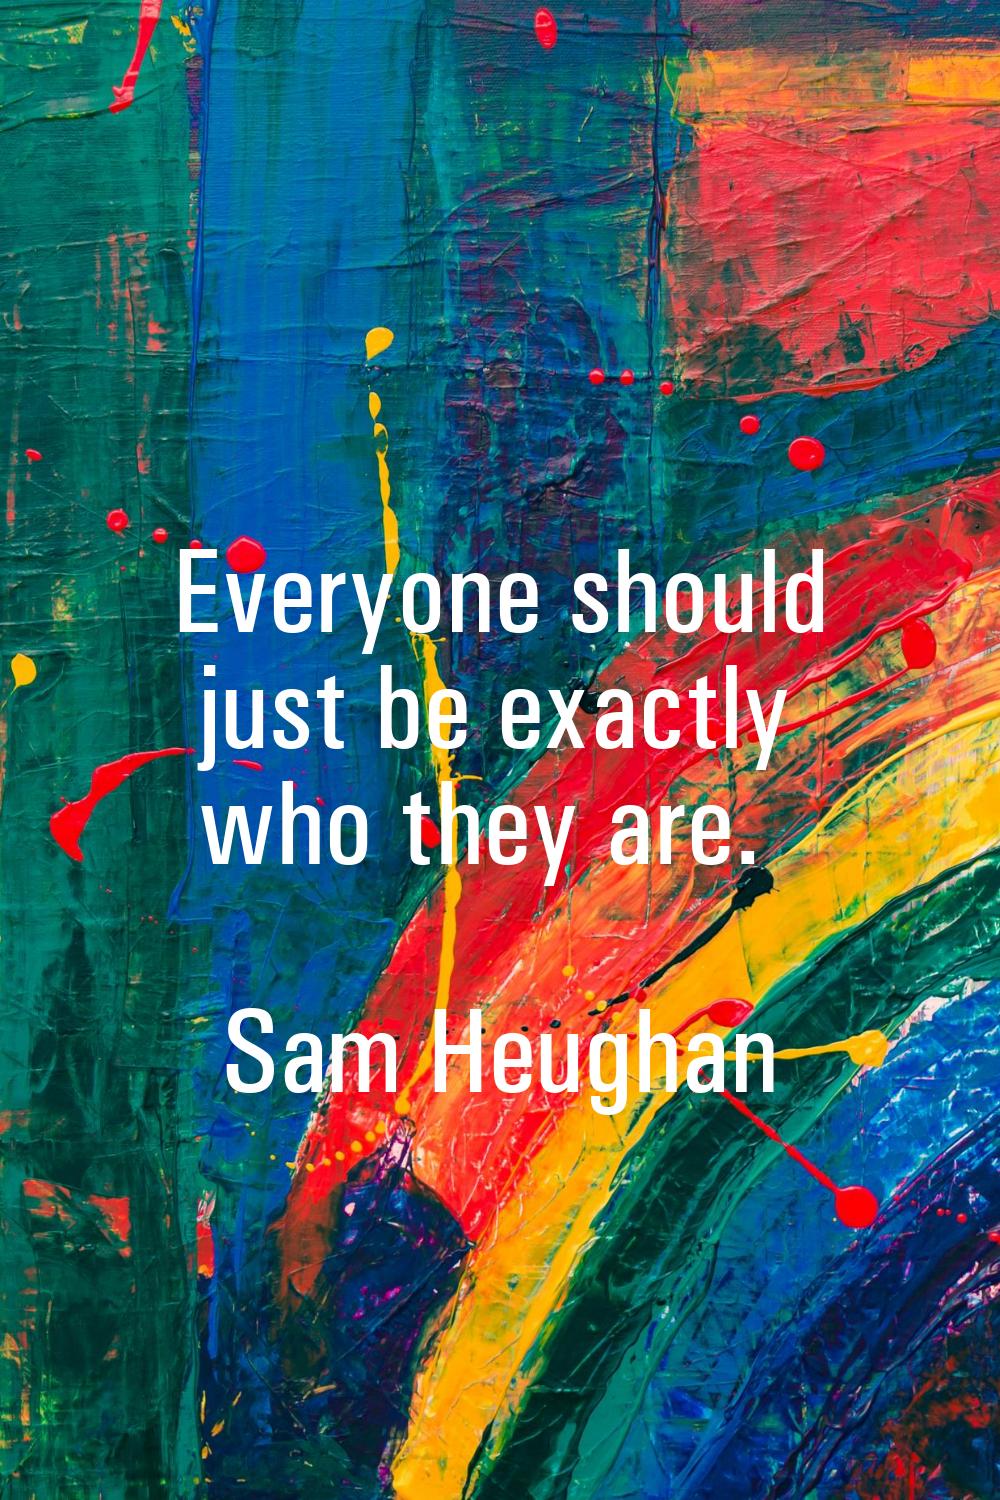 Everyone should just be exactly who they are.